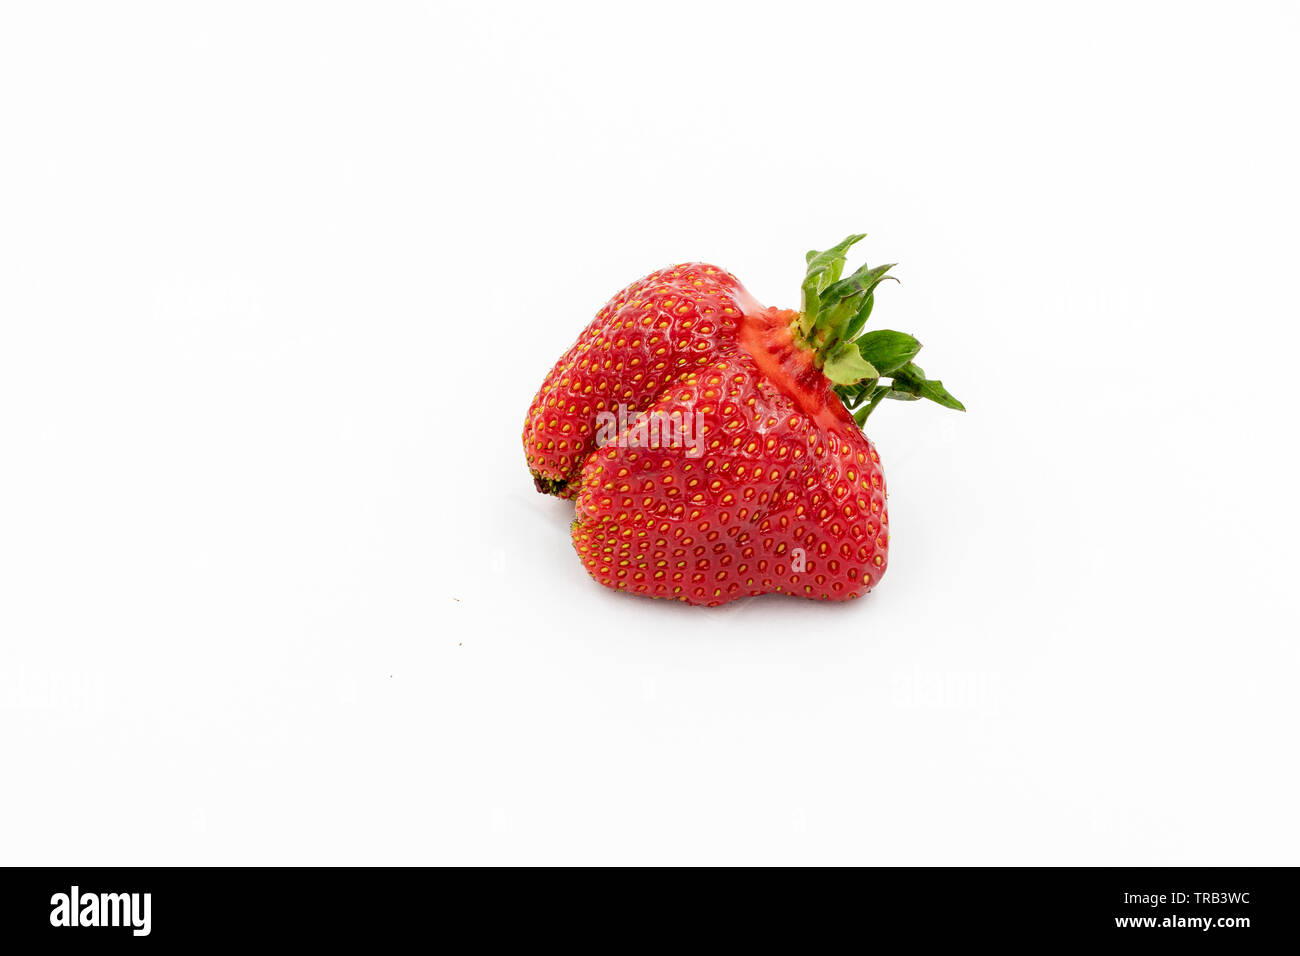 Fresh Strawberry. Imperfect Vegetable. Raw Organic Fruit Closeup Isolated on White. Sweet Red Natural Berry. Vegetarian Nutrition Breakfast Ingredient Stock Photo